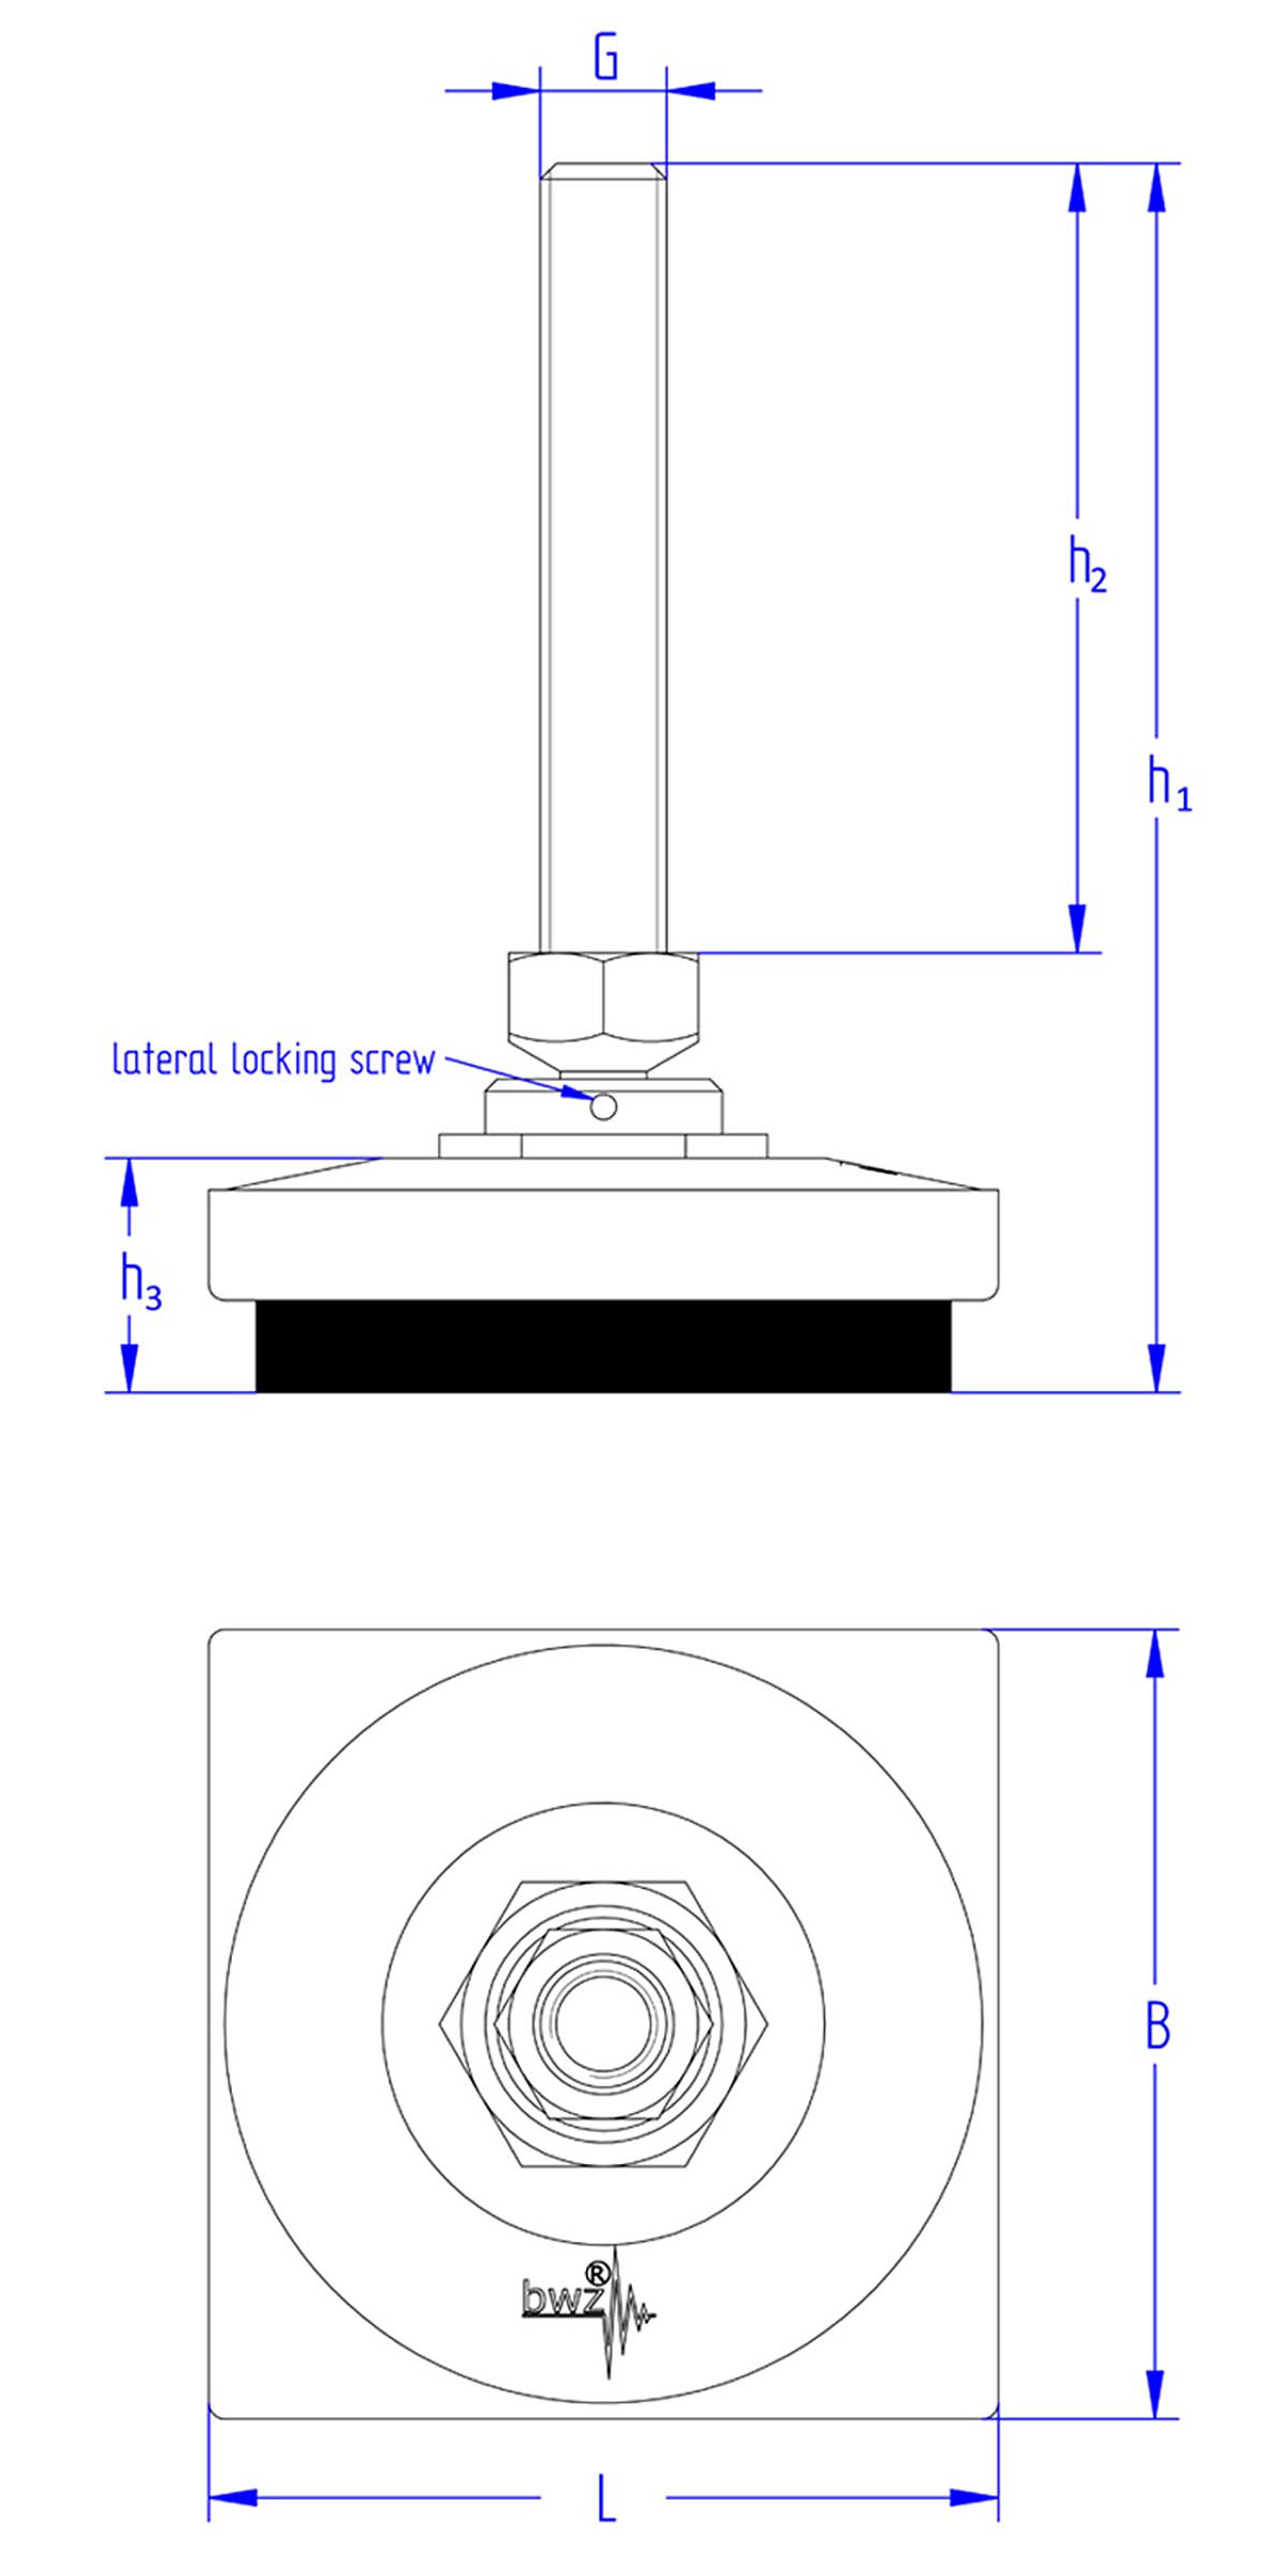 schematic drawing of a square levelling element made of cast iron, with a pendulum-action levelling screw placed in a pressure fitting on top of the cast iron corpus, secured with two small grub screws on the sides against falling apart, and elastomer for vibration damping at the bottom, in the side view and the view from the top